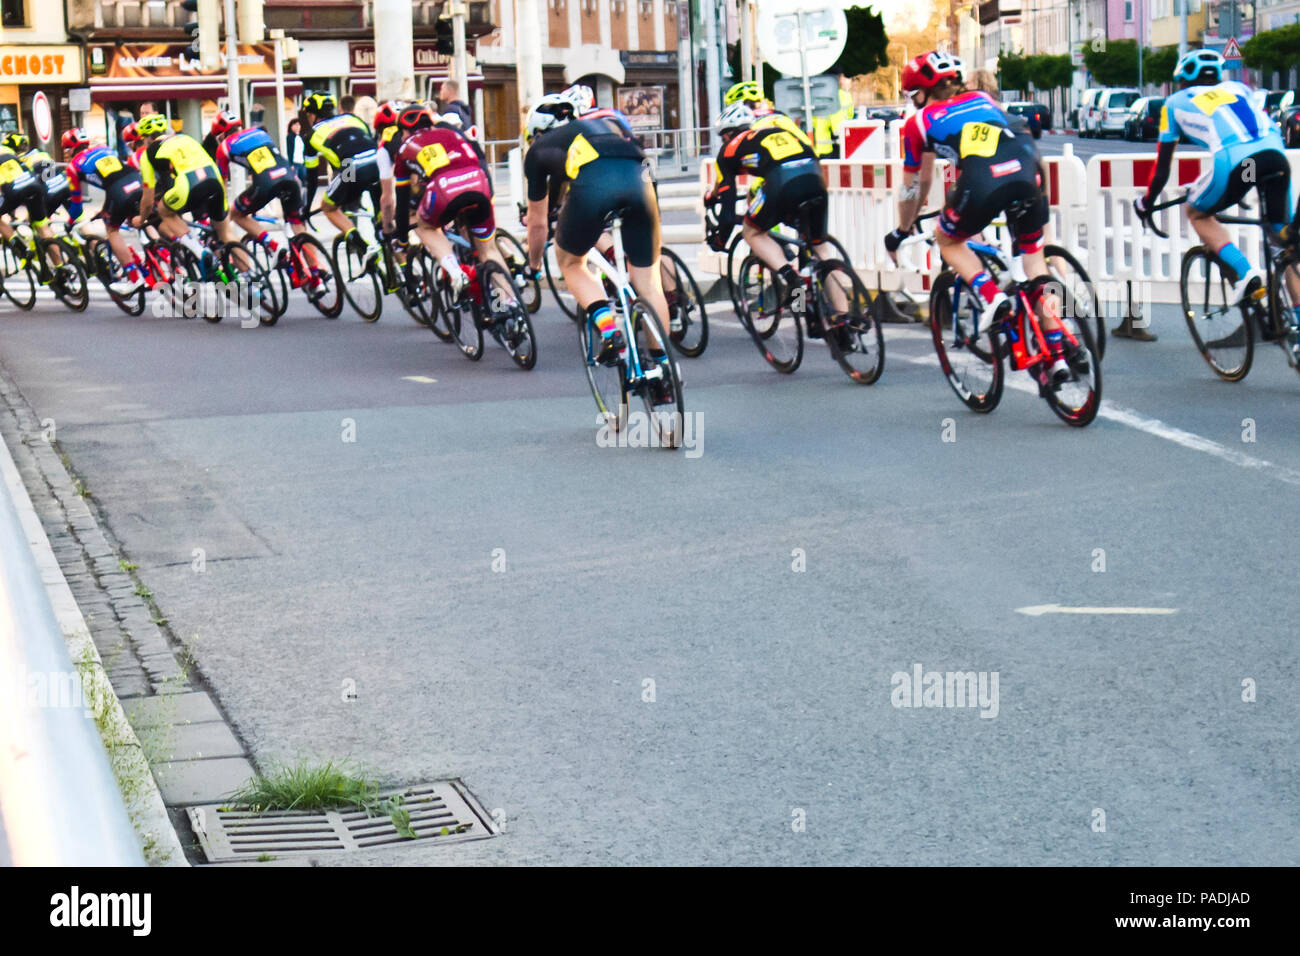 cyclists sprinting during a road bicycle racing in the city streets Stock Photo